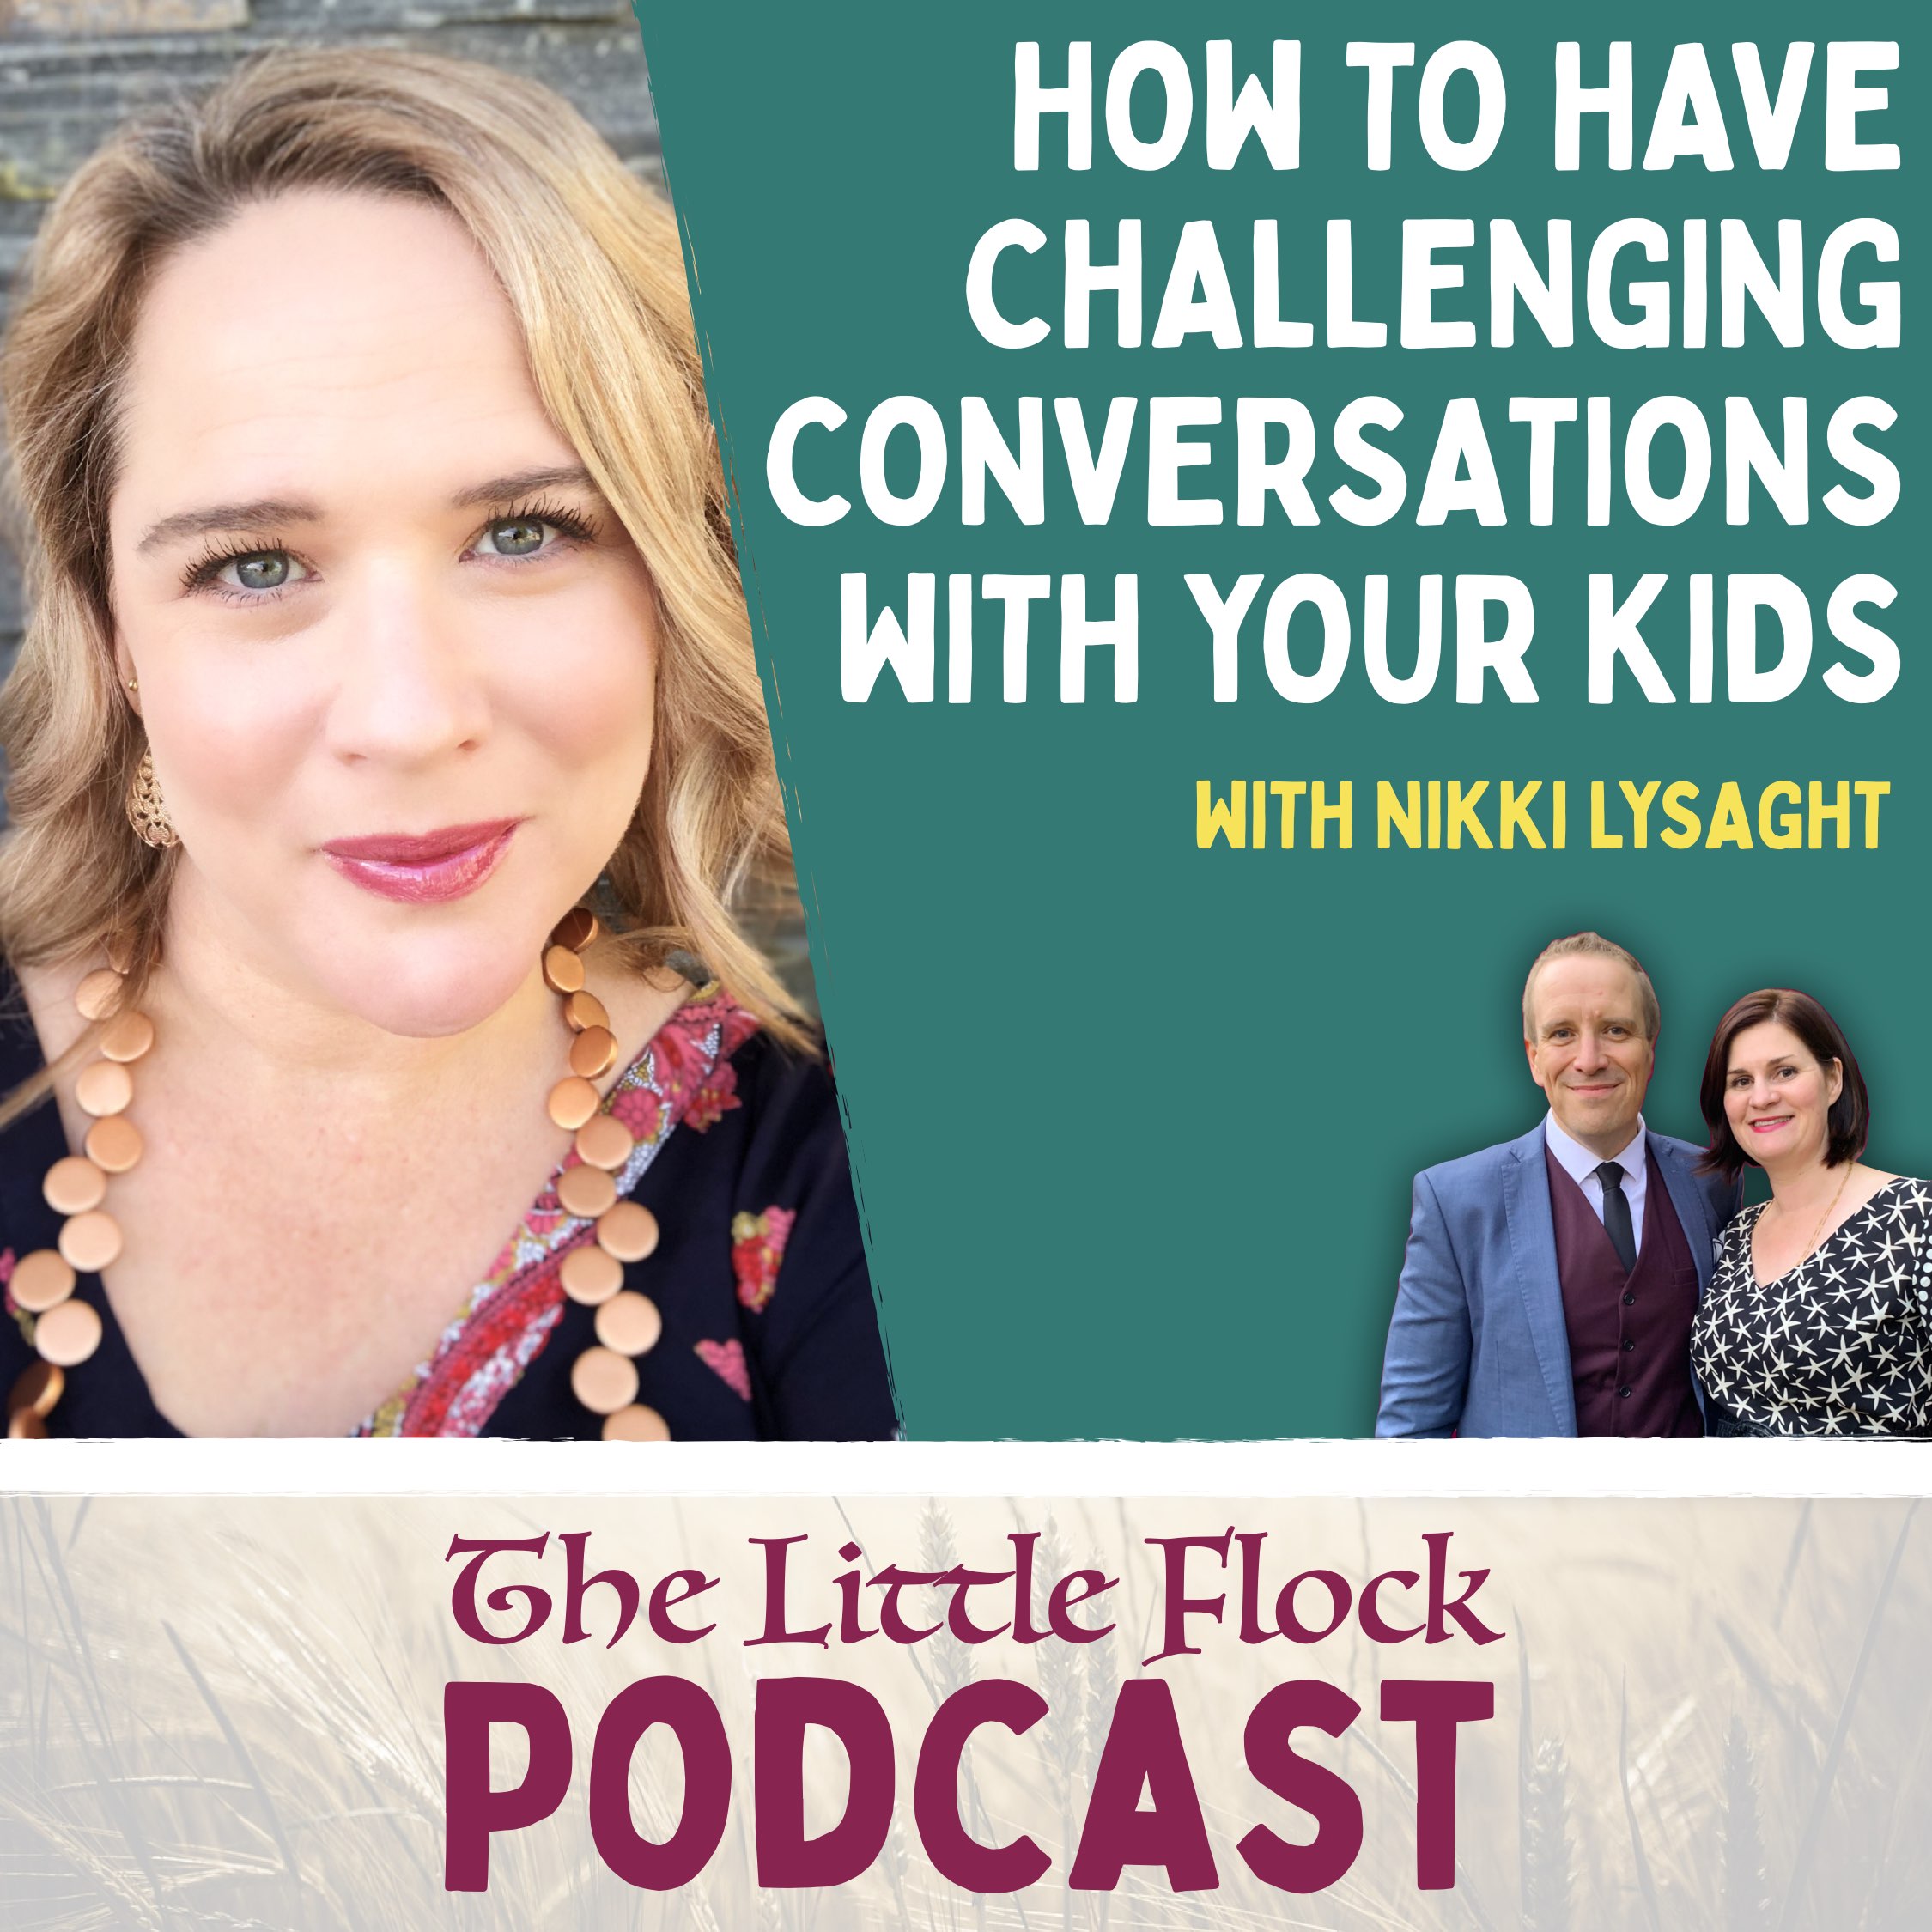 15. How To Have Challenging Conversations With Your Kids - A Conversation With Nikki Lysaght